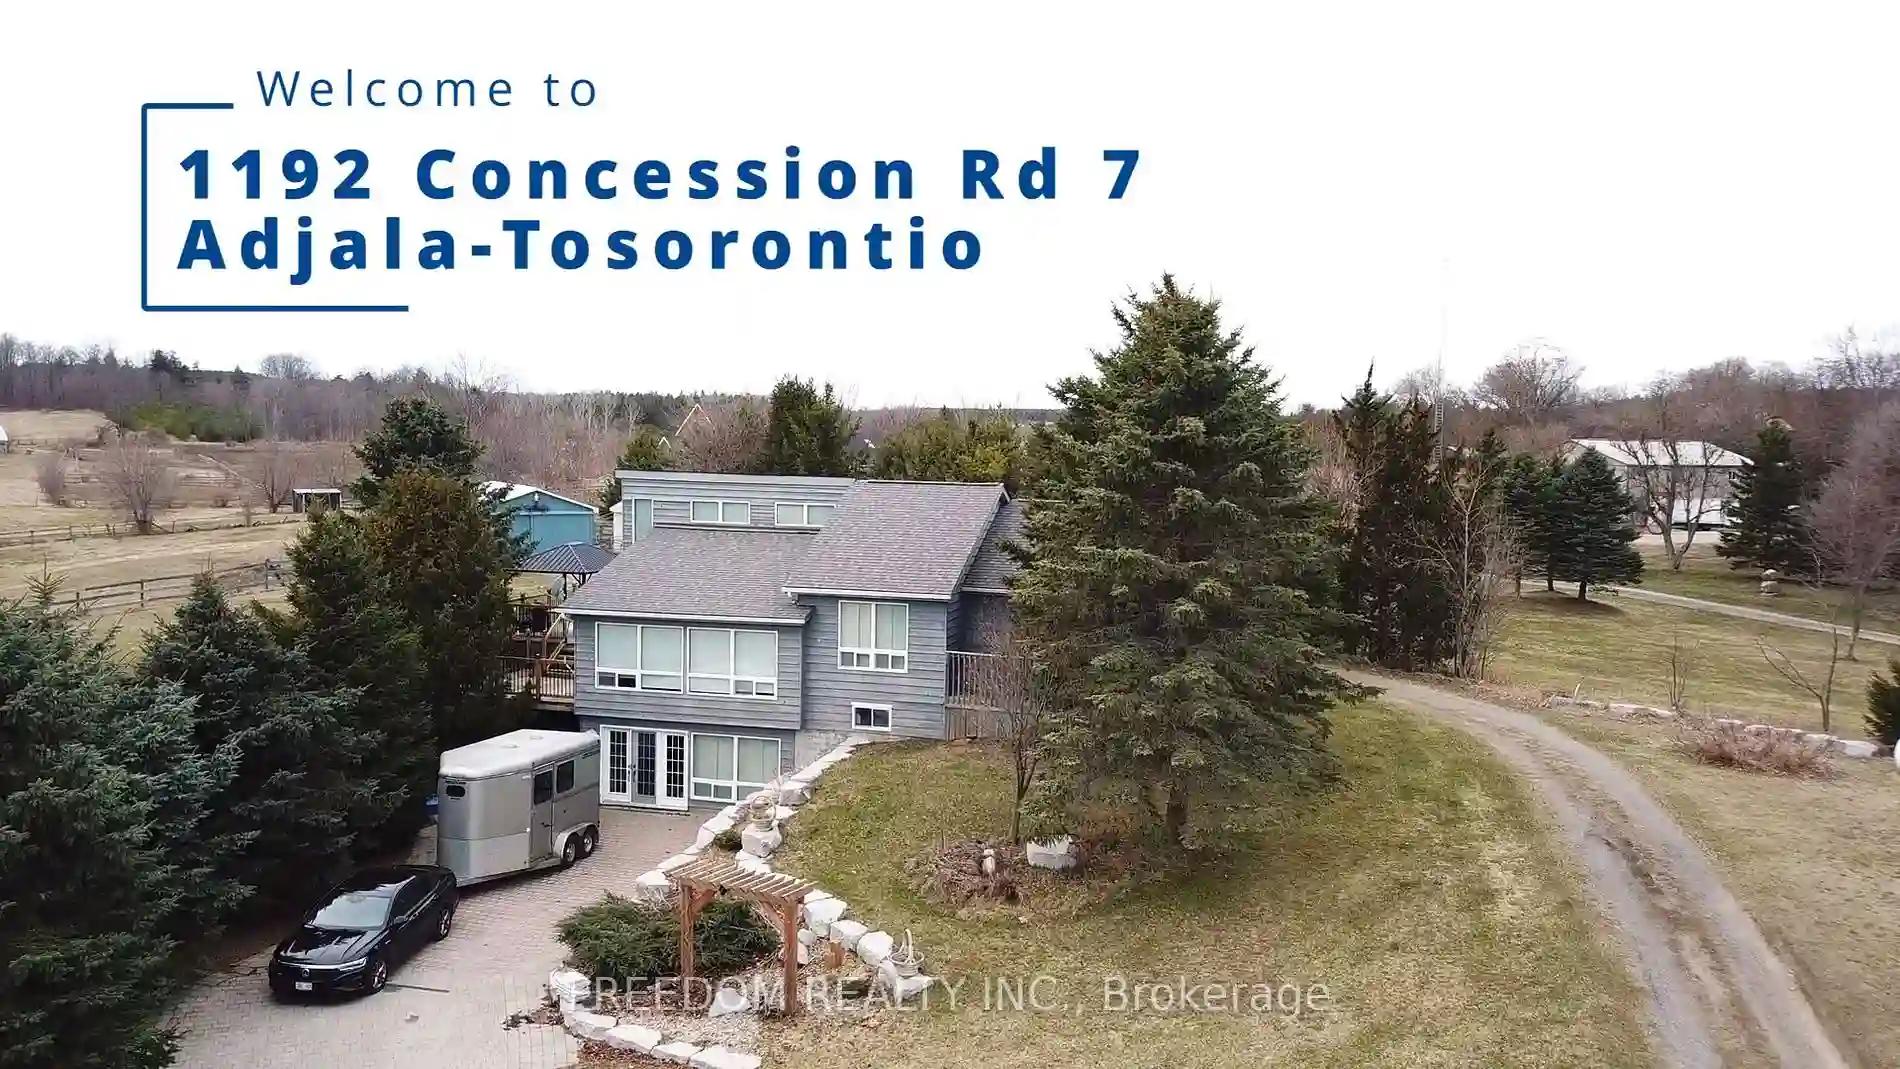 1192 Concession Rd 7